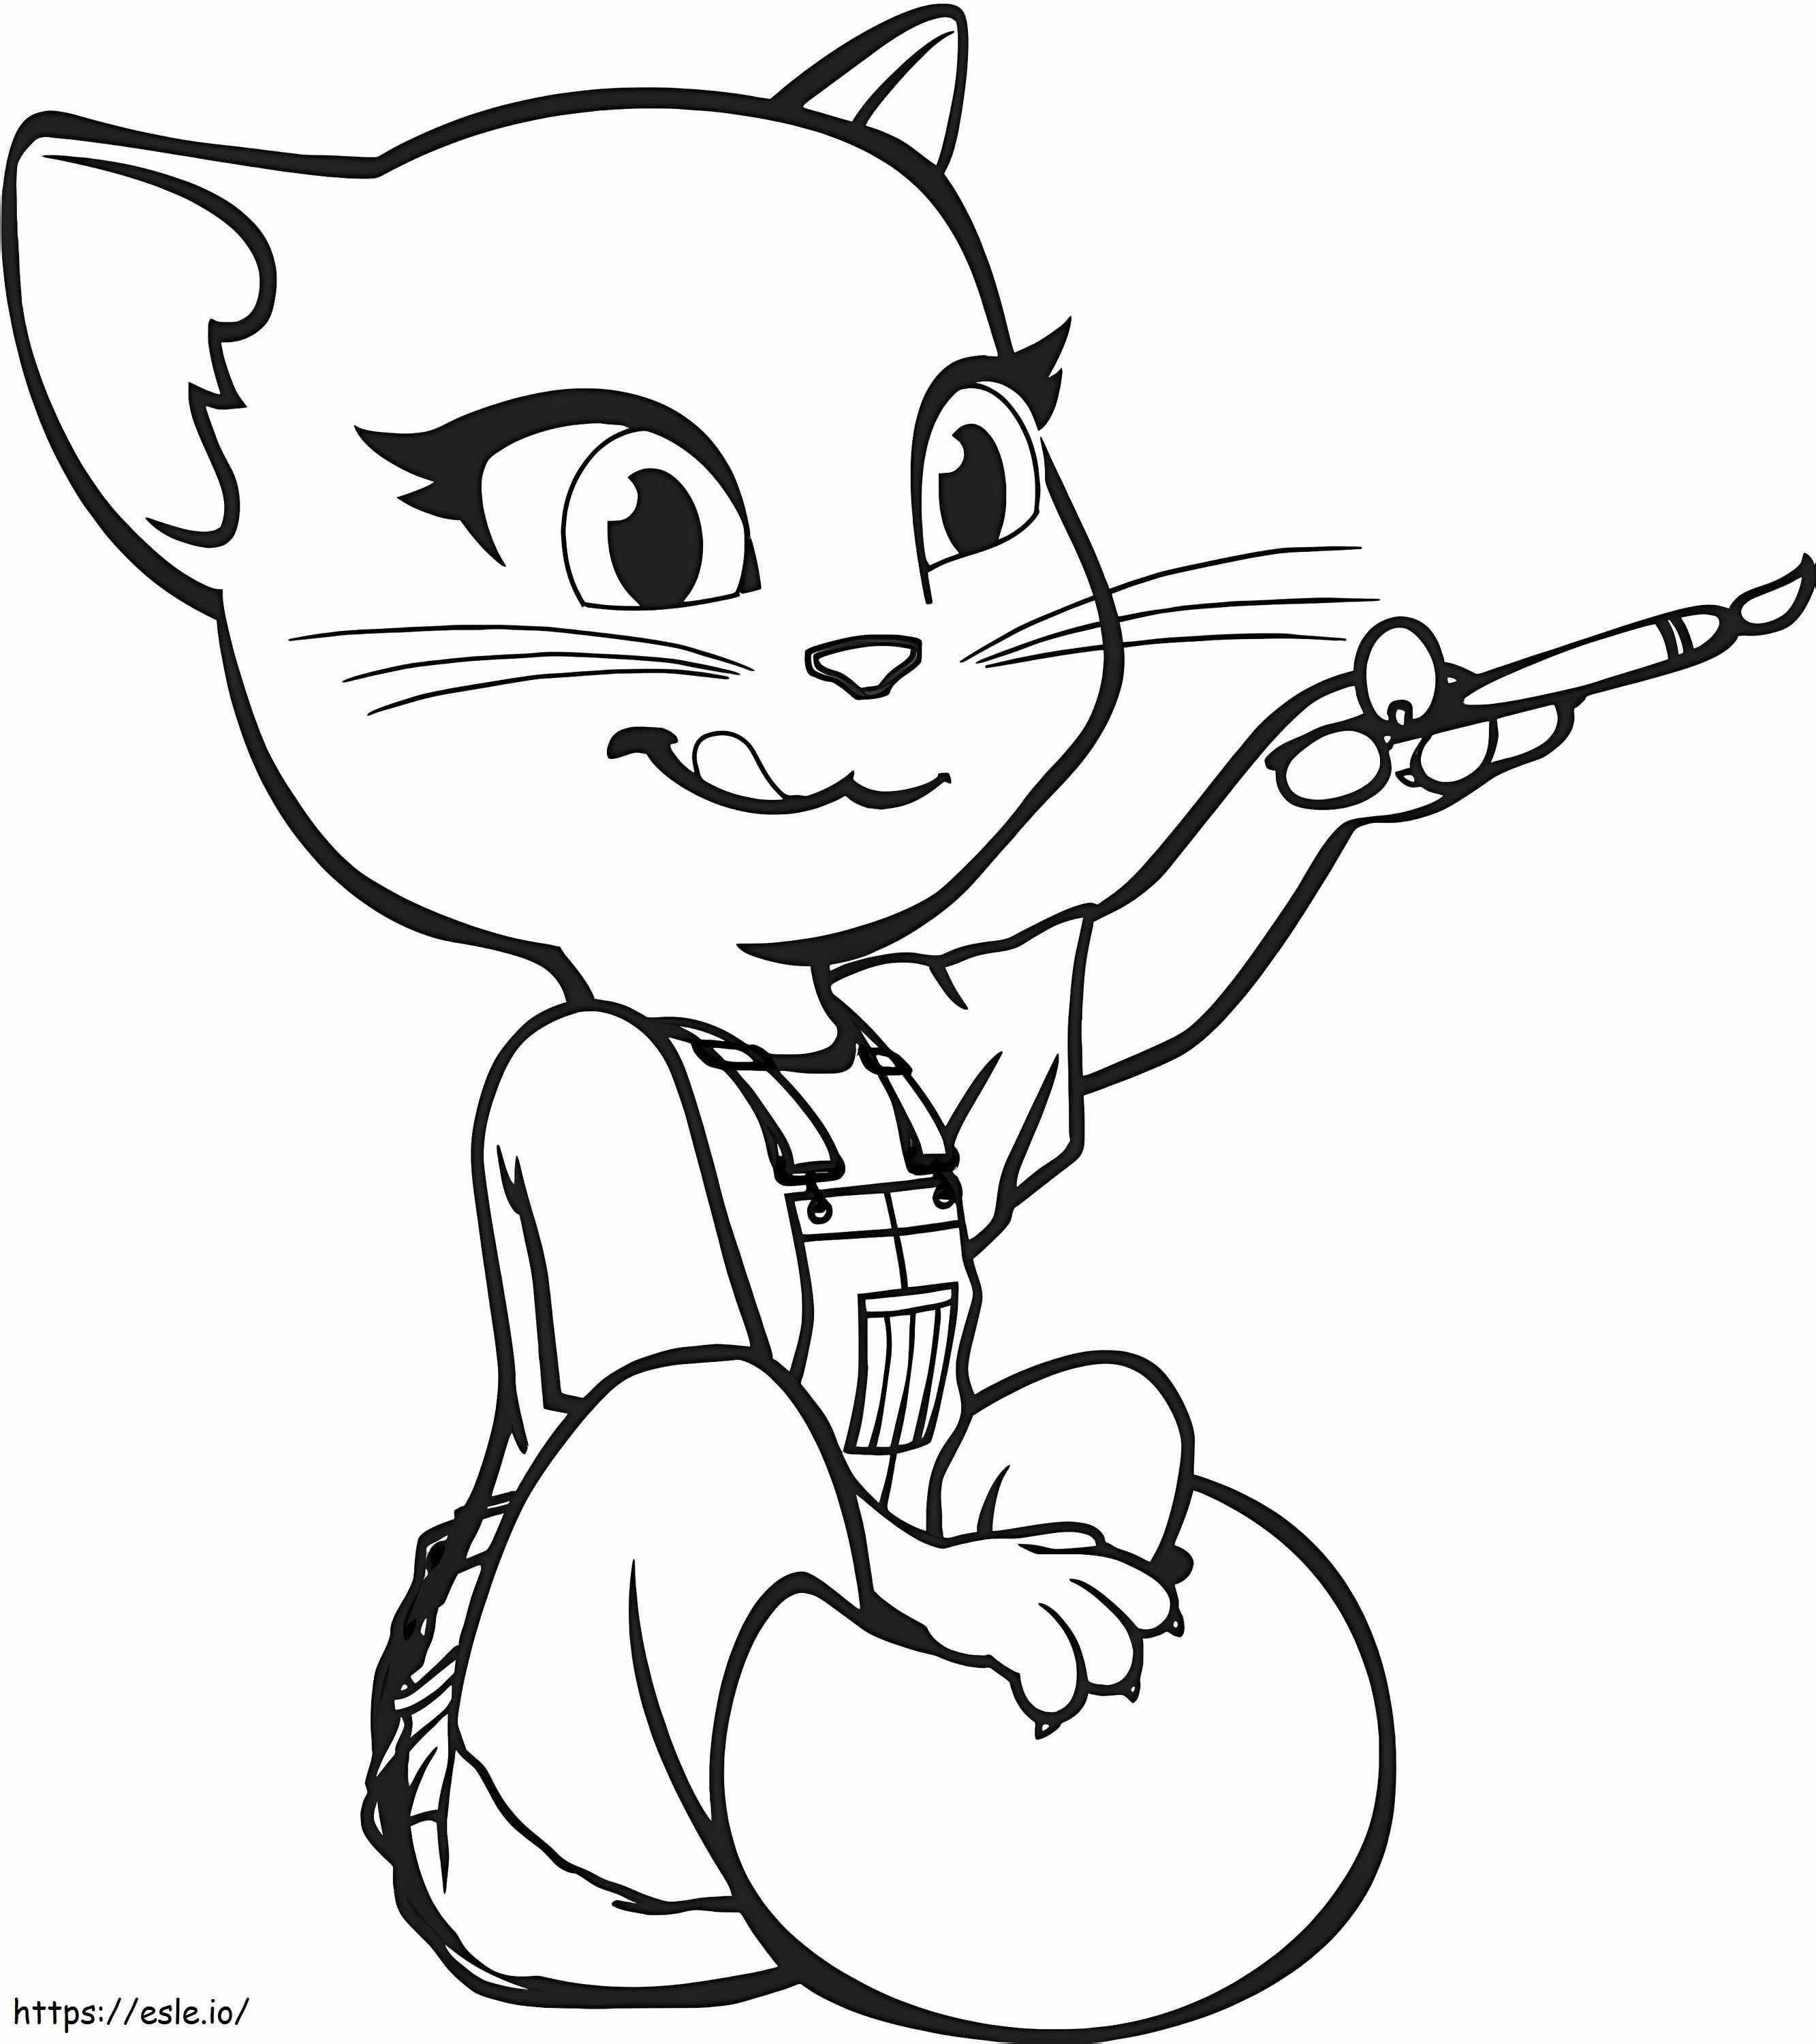 Talking Tom Drawing coloring page